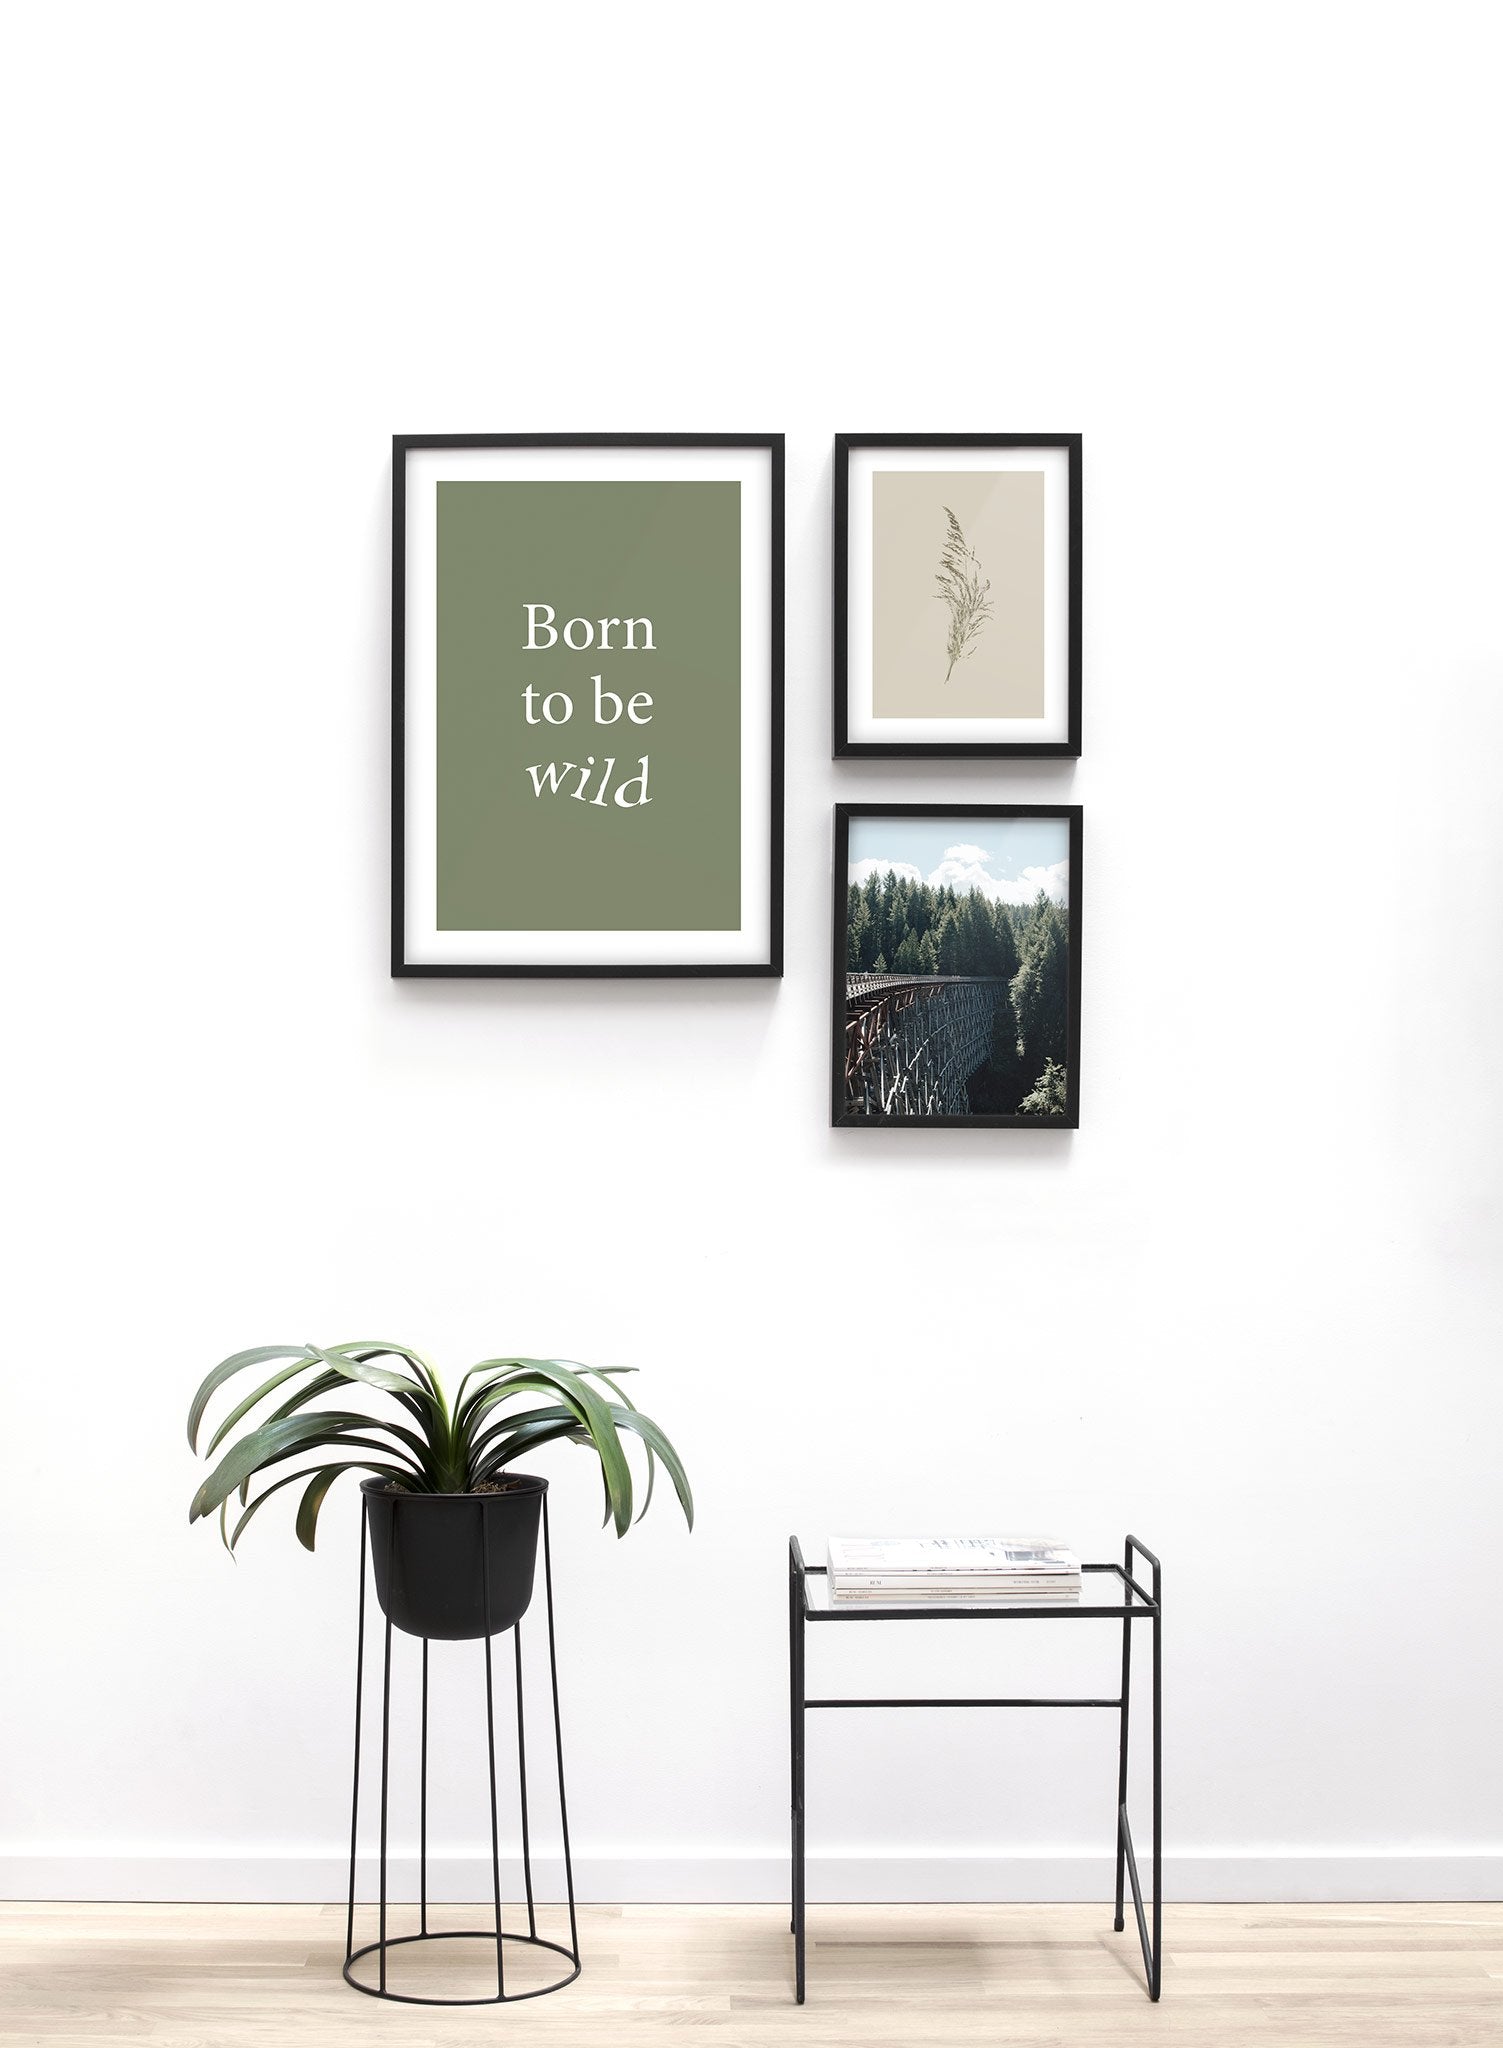 Modern minimalist typography poster by Opposite Wall with Born to be Wild quote in green - Lifestyle Trio - Living Room